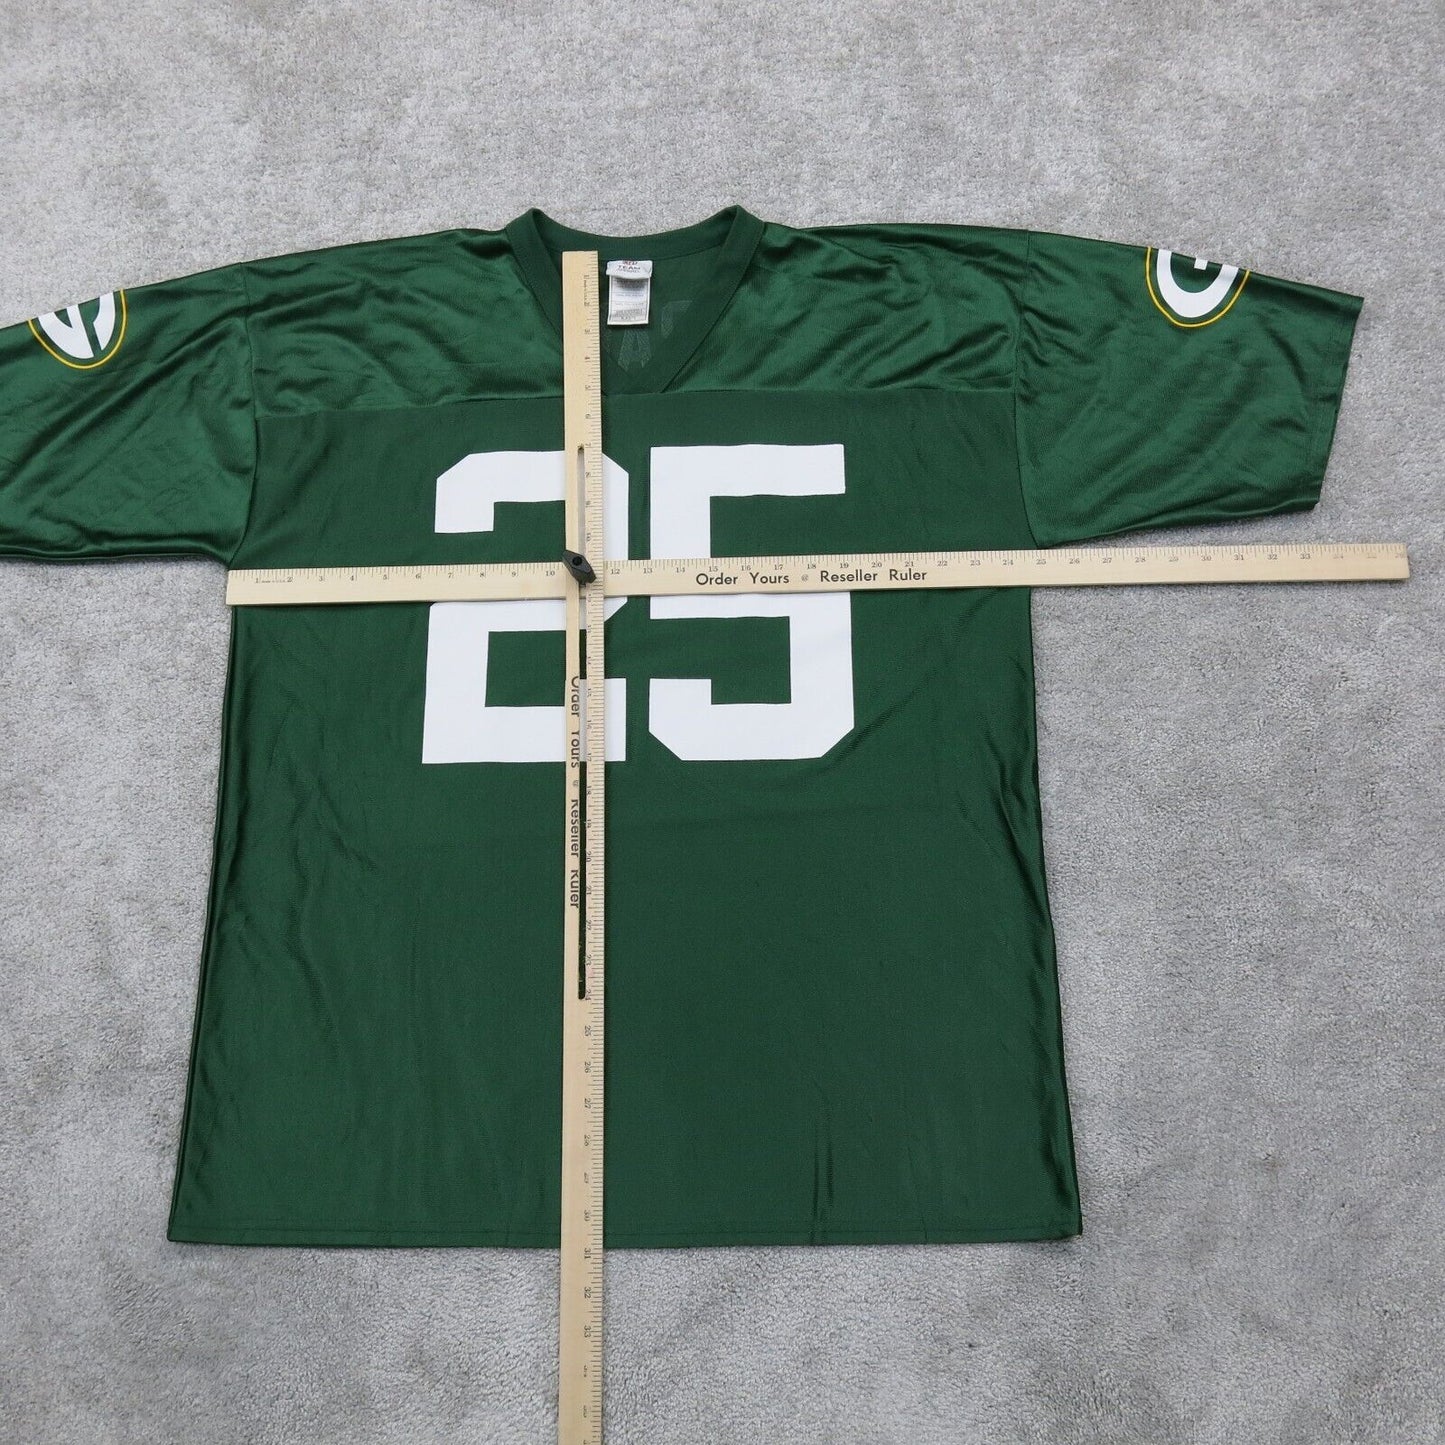 Green Bay Packers Ryan Grant #25 Team American NFL Football Jersey Mens Size XL